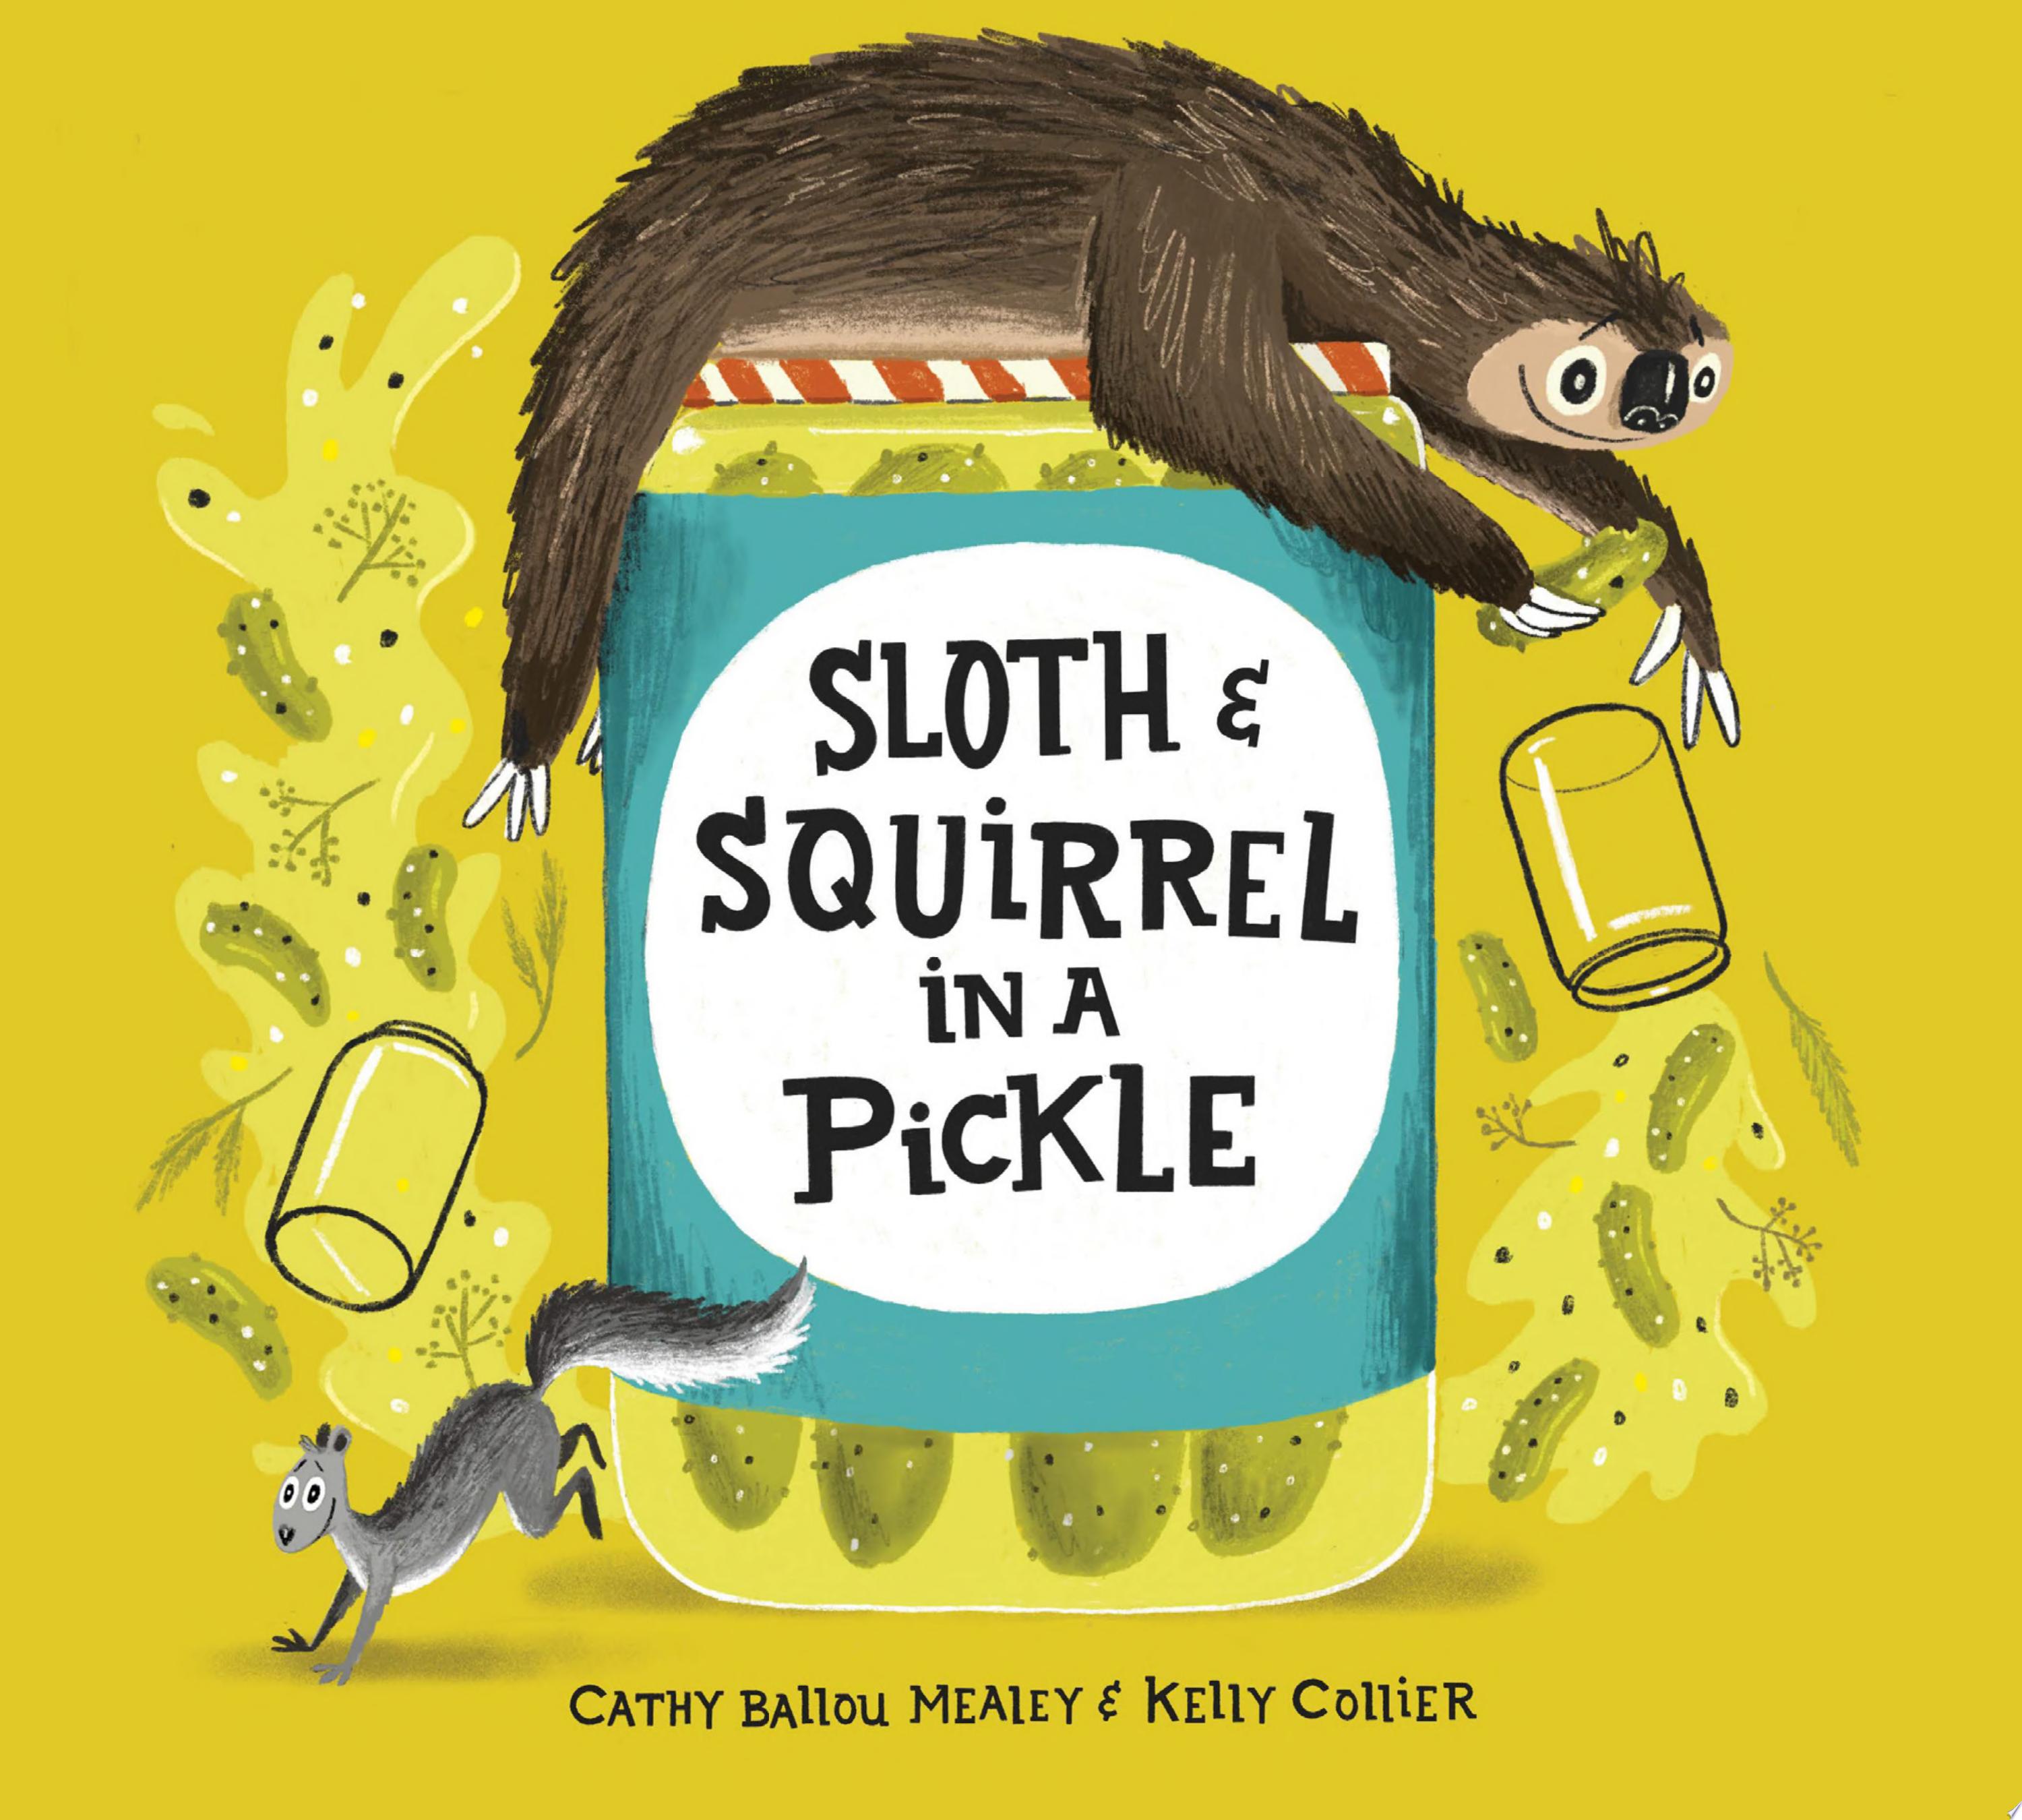 Image for "Sloth and Squirrel in a Pickle"